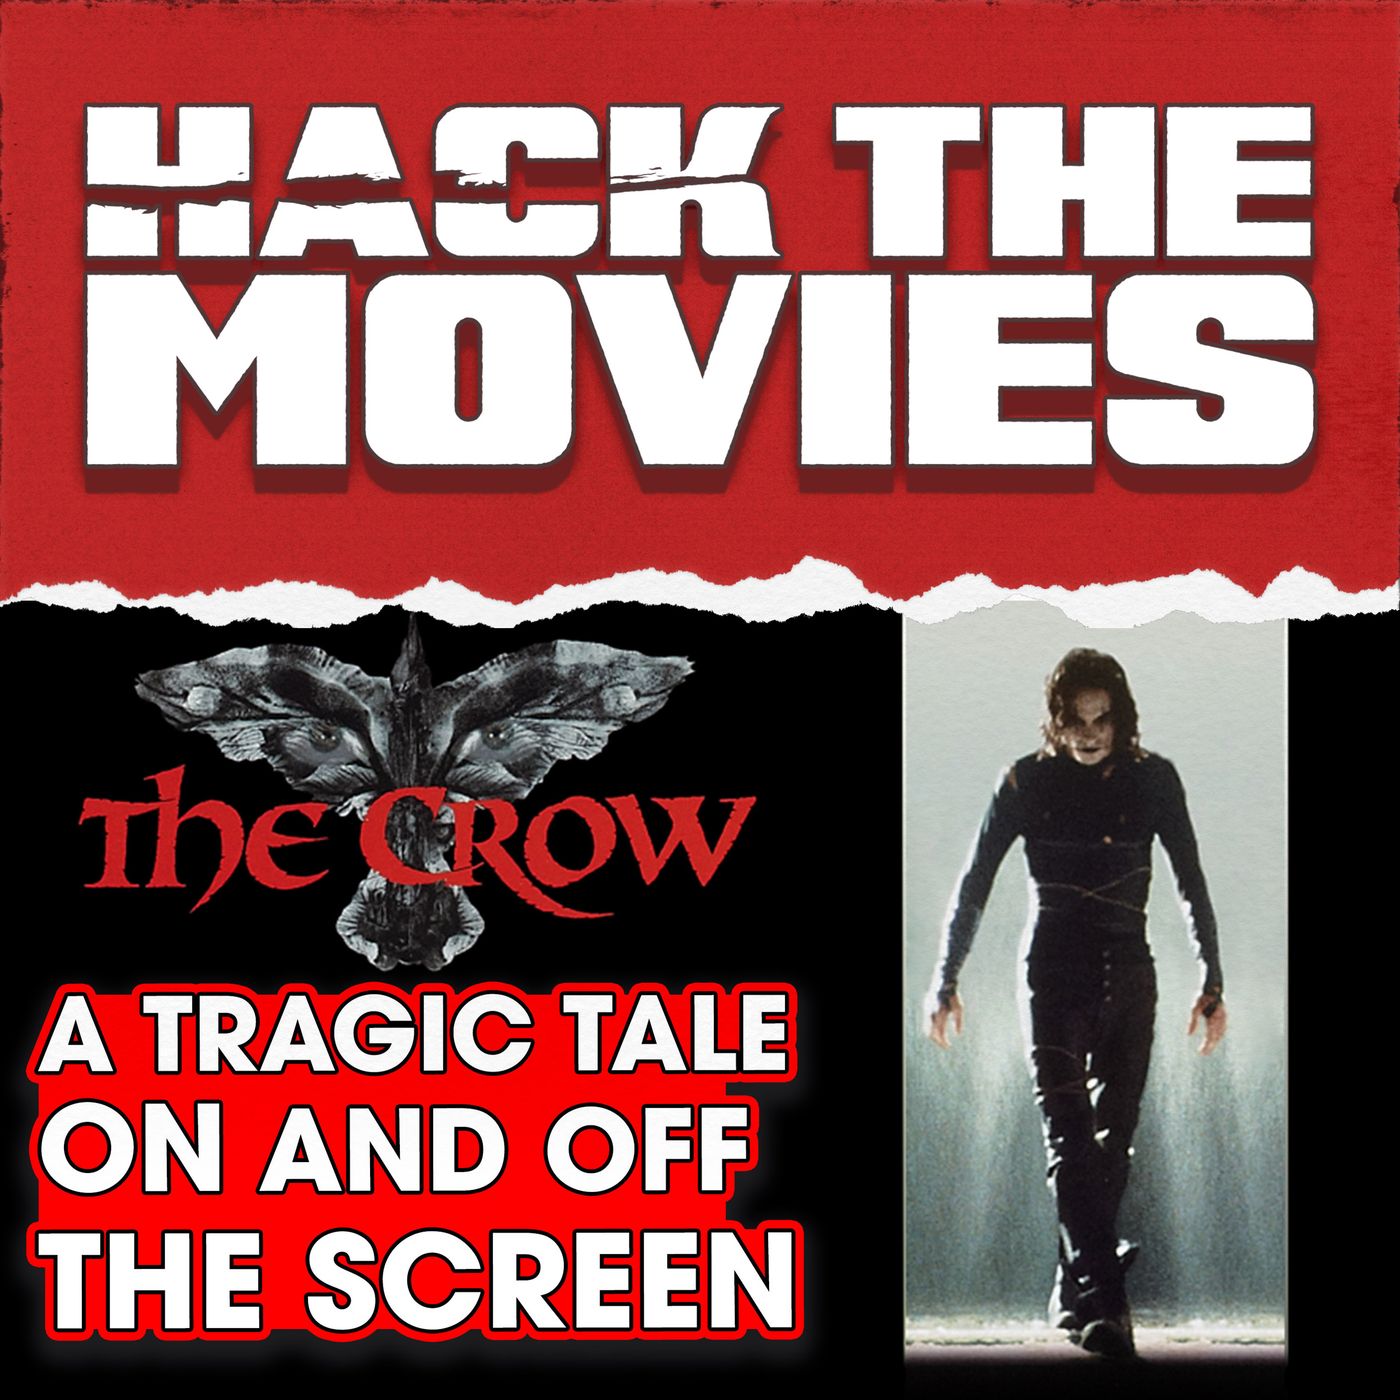 The Crow is A Tragic Tale On And Off Screen - Talking About Tapes (#289)